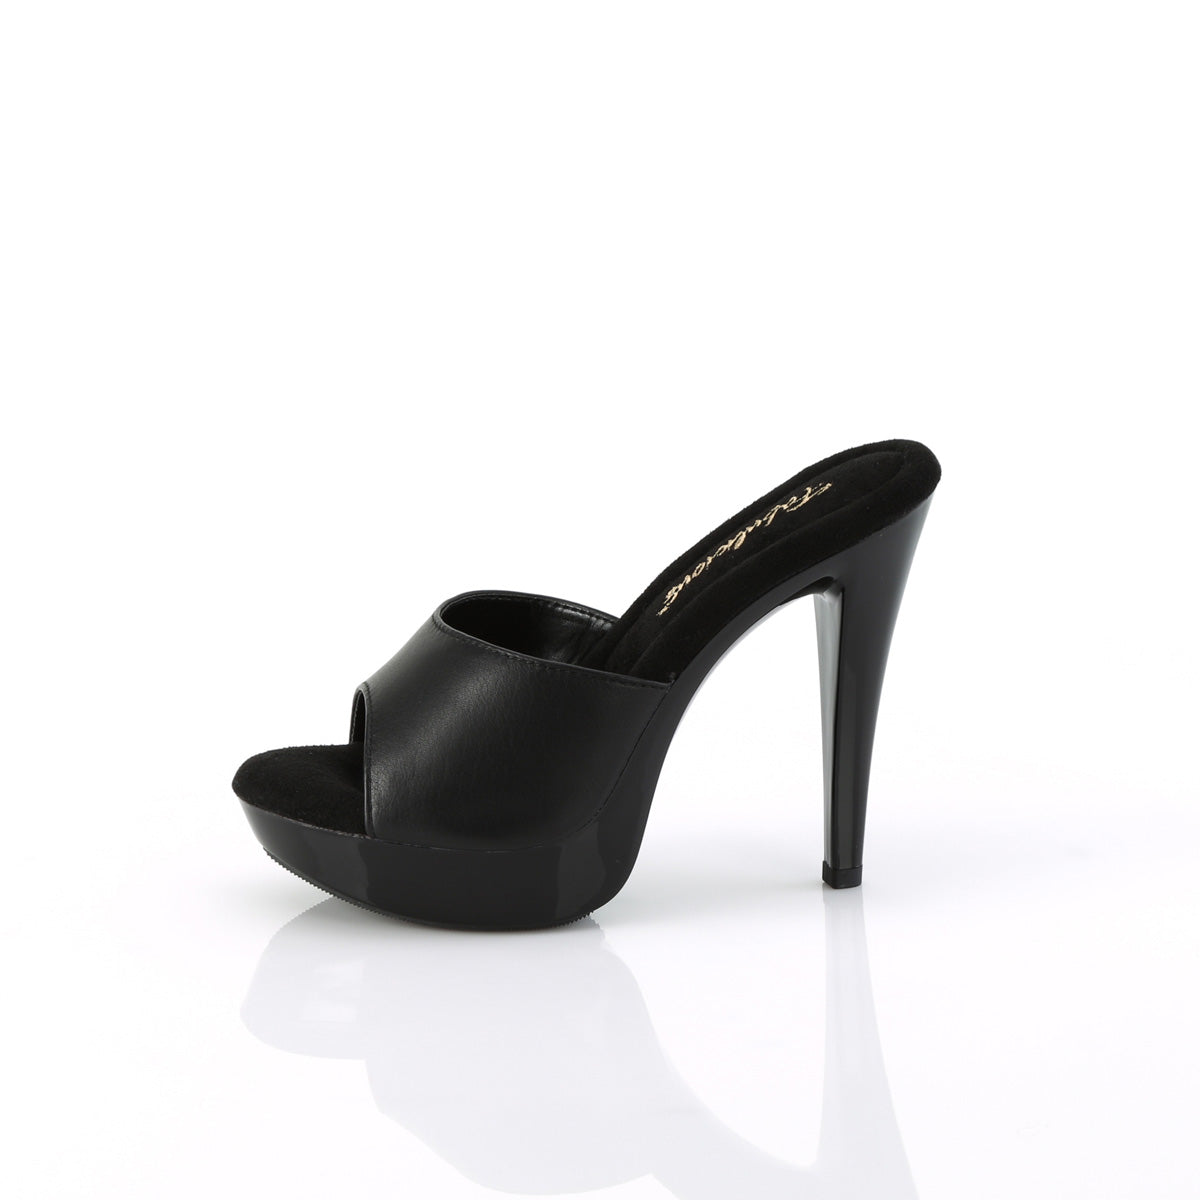 COCKTAIL-501L Fabulicious Black Leather/Black Shoes [Sexy Shoes]